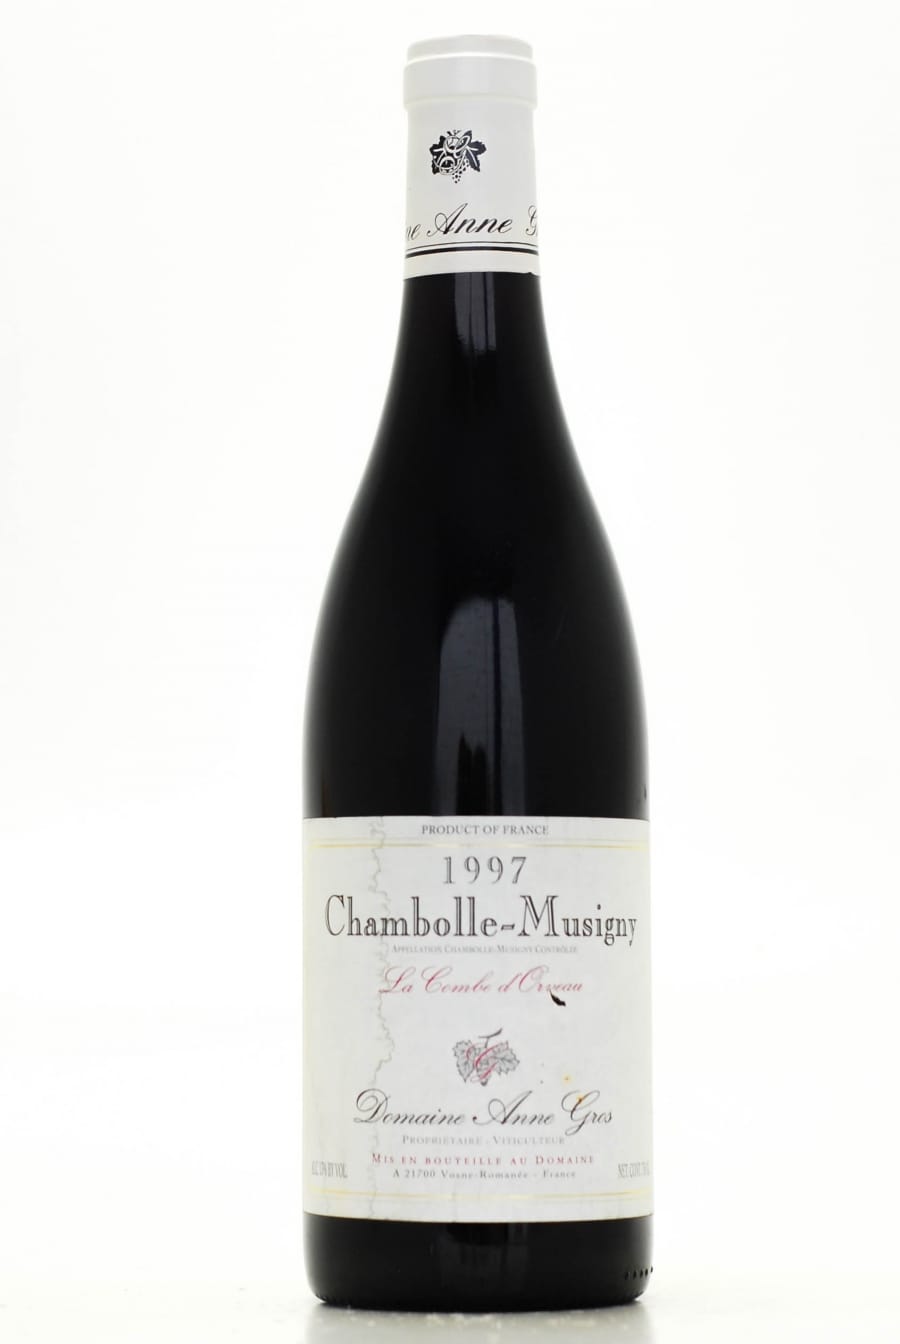 Anne Gros - Chambolle Musigny La Combe D'Orveau 1997